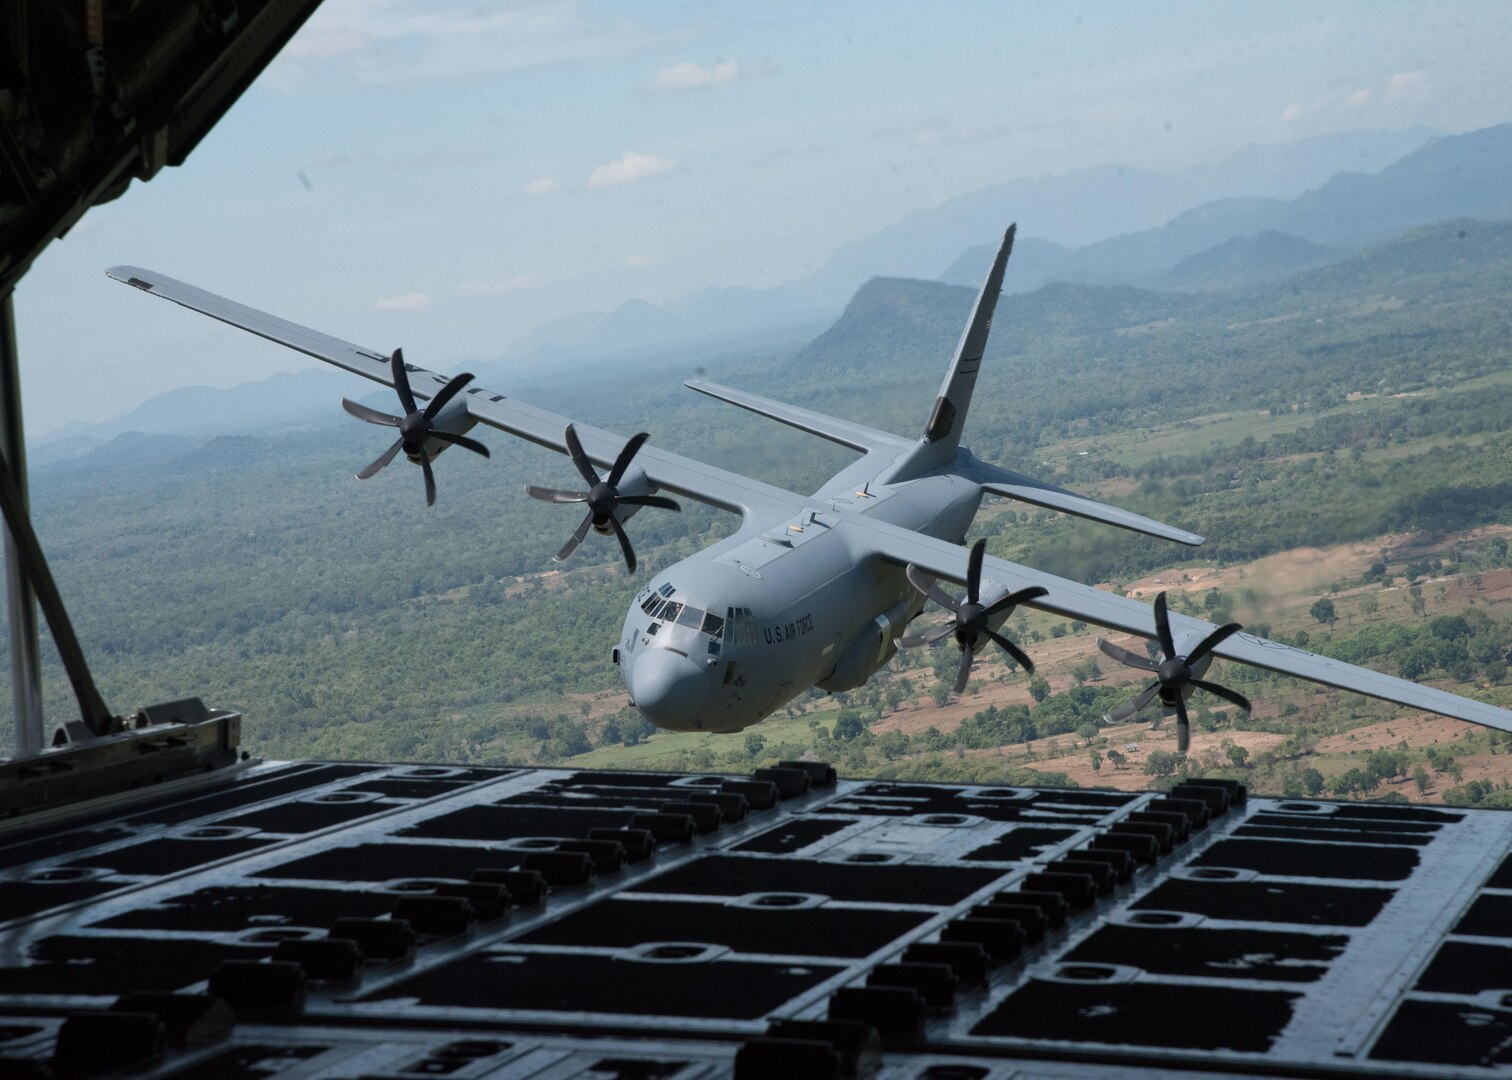 Pacific Air Force, Sri Lanka host Pacific Airlift Rally